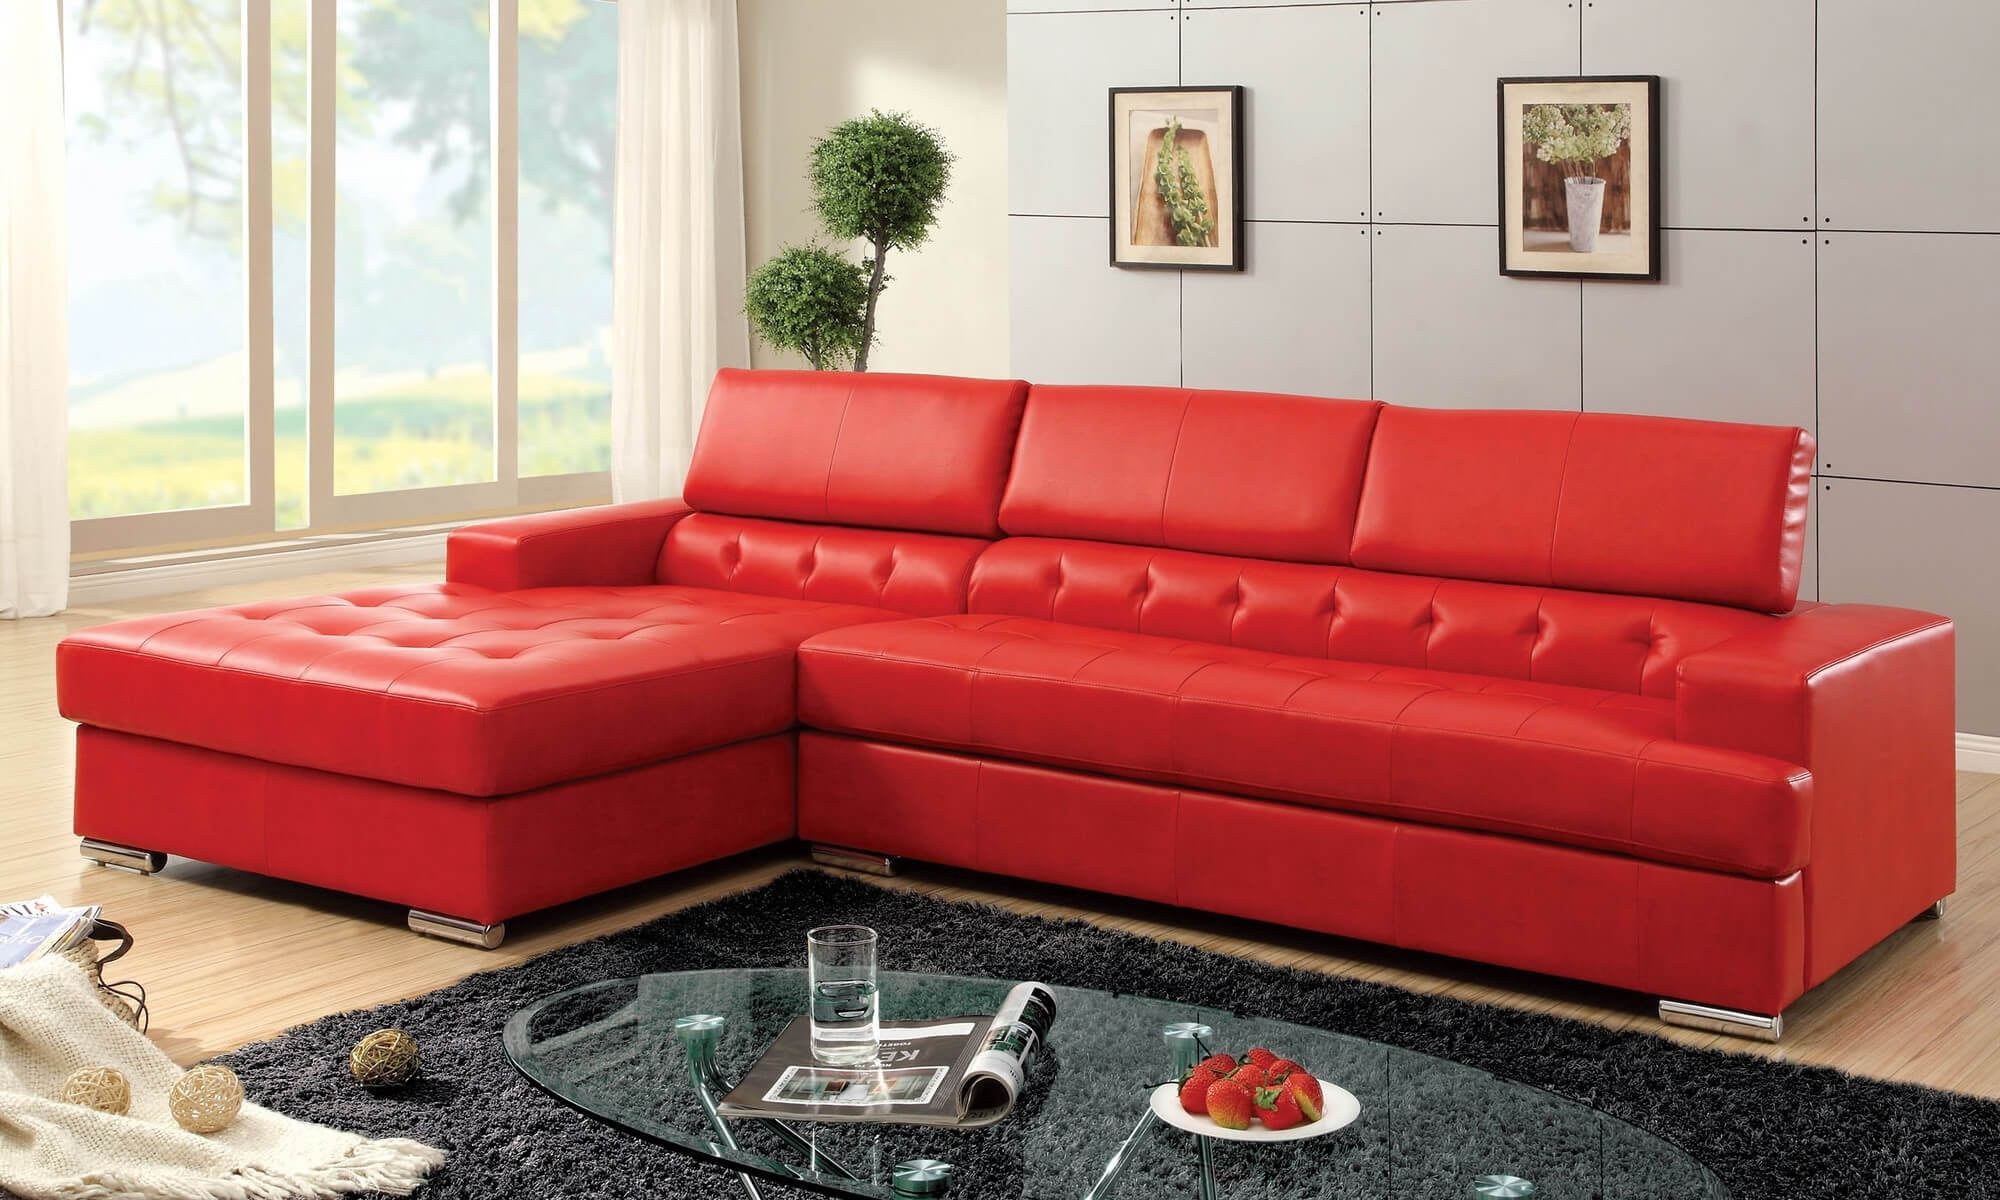 18 Stylish Modern Red Sectional Sofas With Regard To Red Leather Couches For Living Room (View 13 of 15)